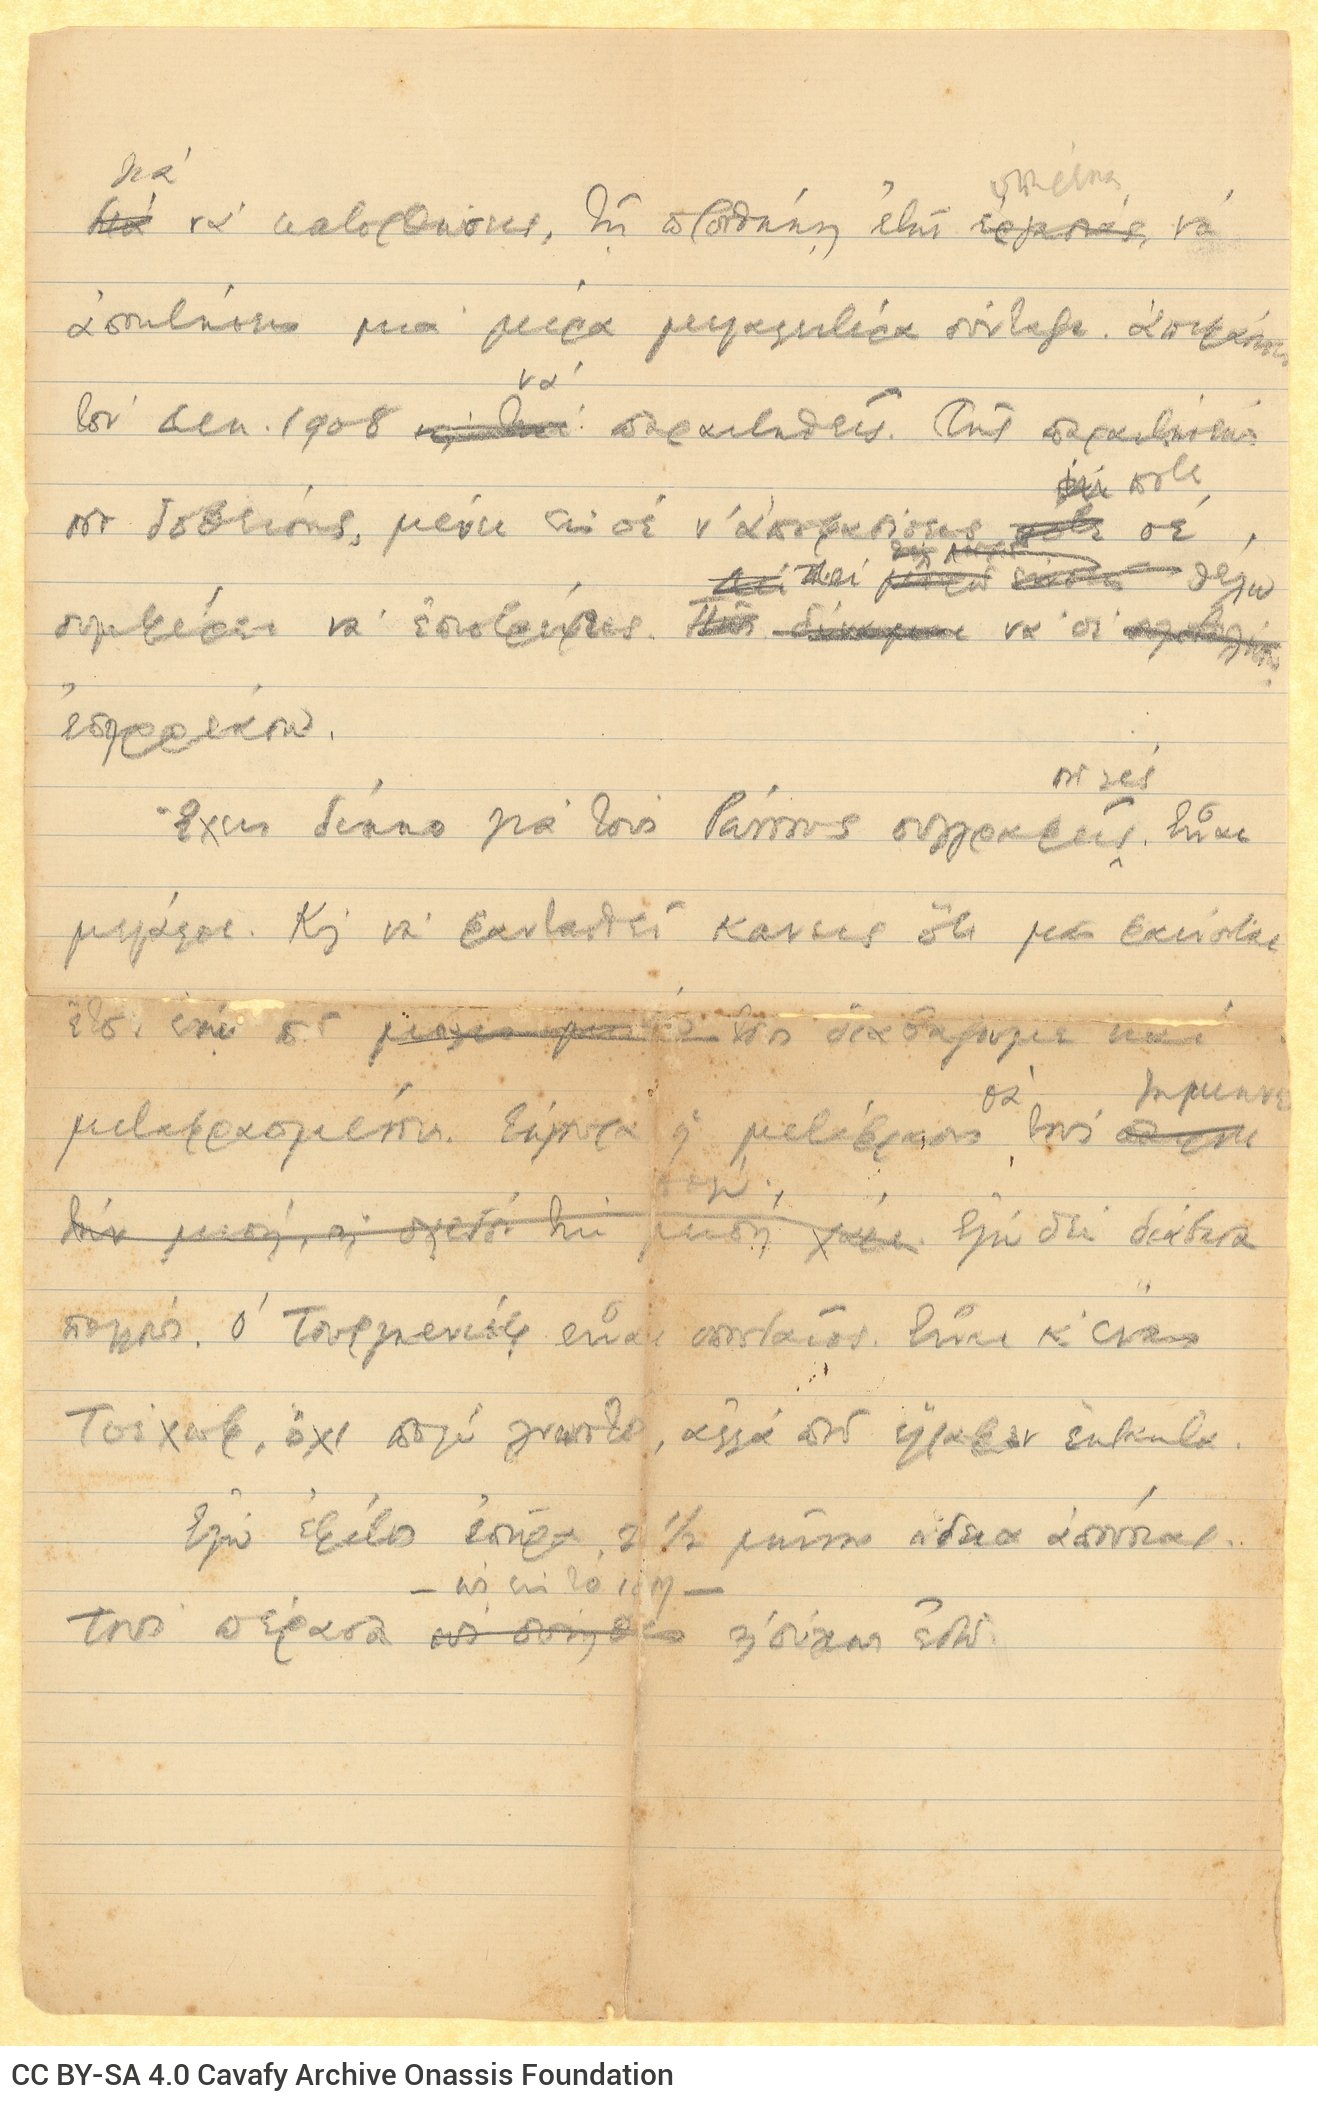 Handwritten draft letter by C. P. Cavafy to his brother, Paul, on both sides of a ruled sheet. It is a reply to a letter he h